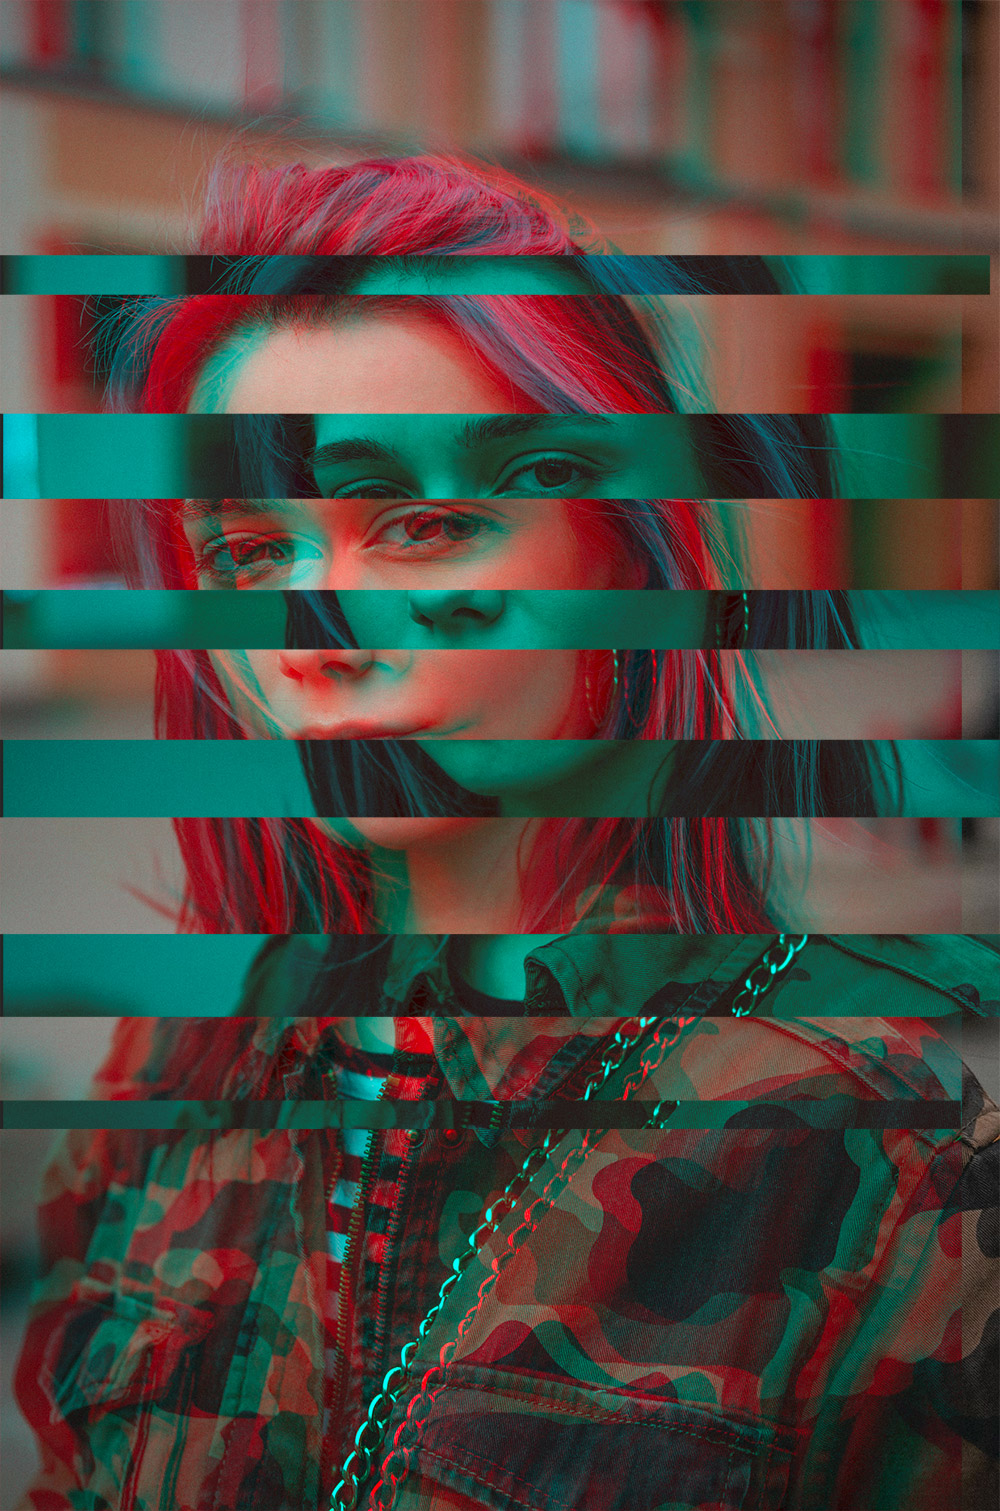 How to Create a Glitch Effect in Photoshop (Step By Step)